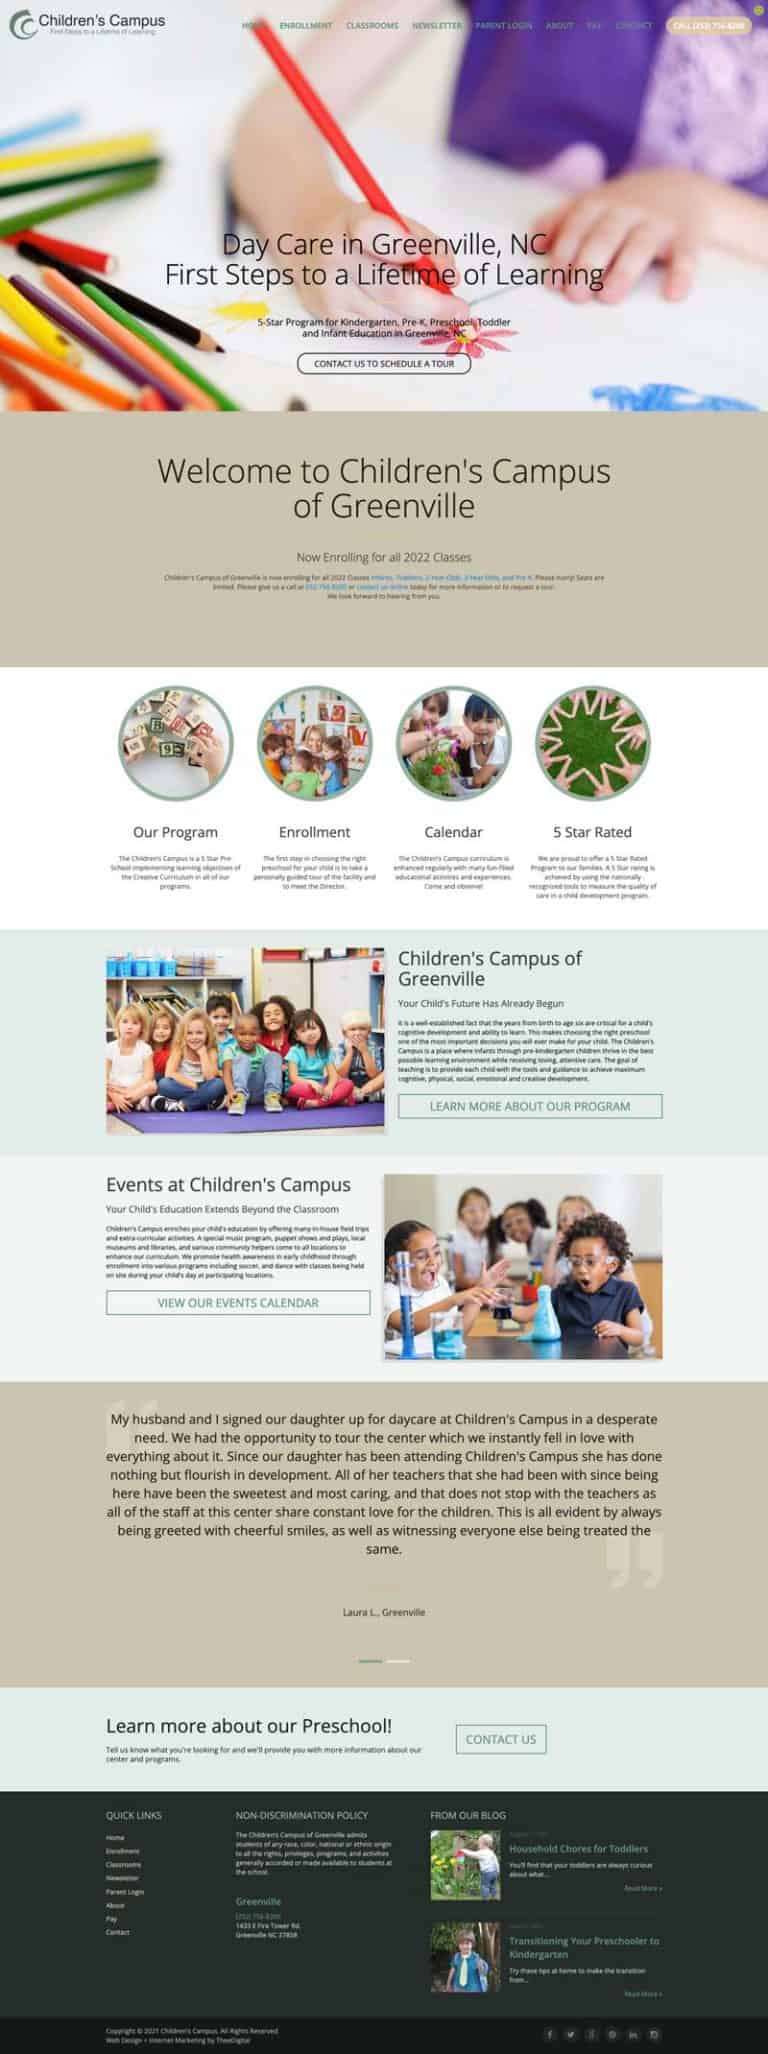 Marketing Services for Greenville Daycare